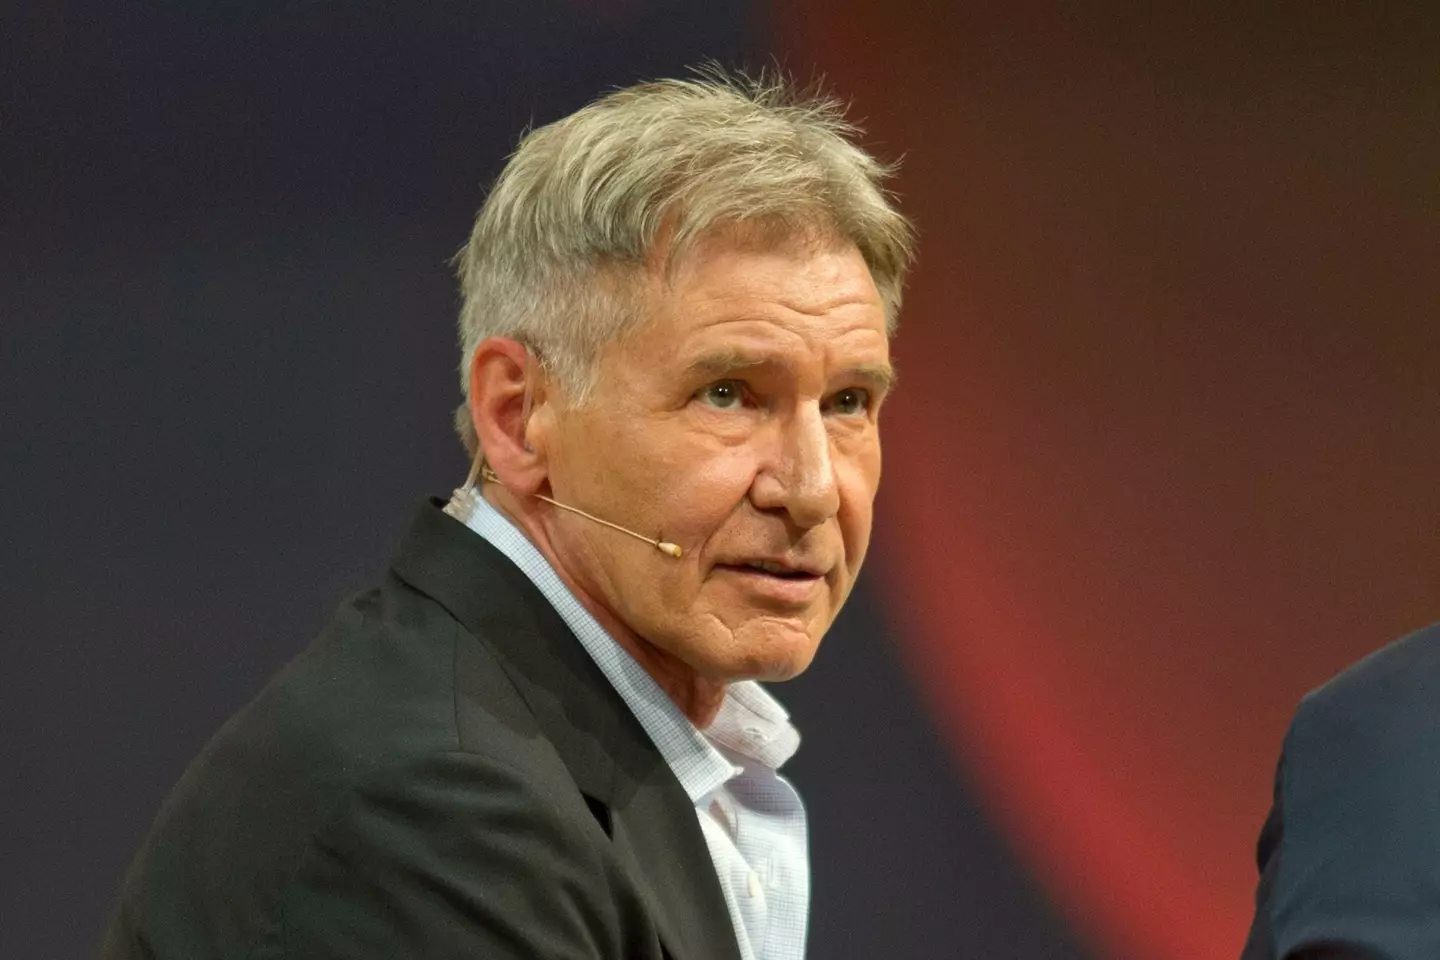 Harrison Ford has suggested it is the end for Indy.